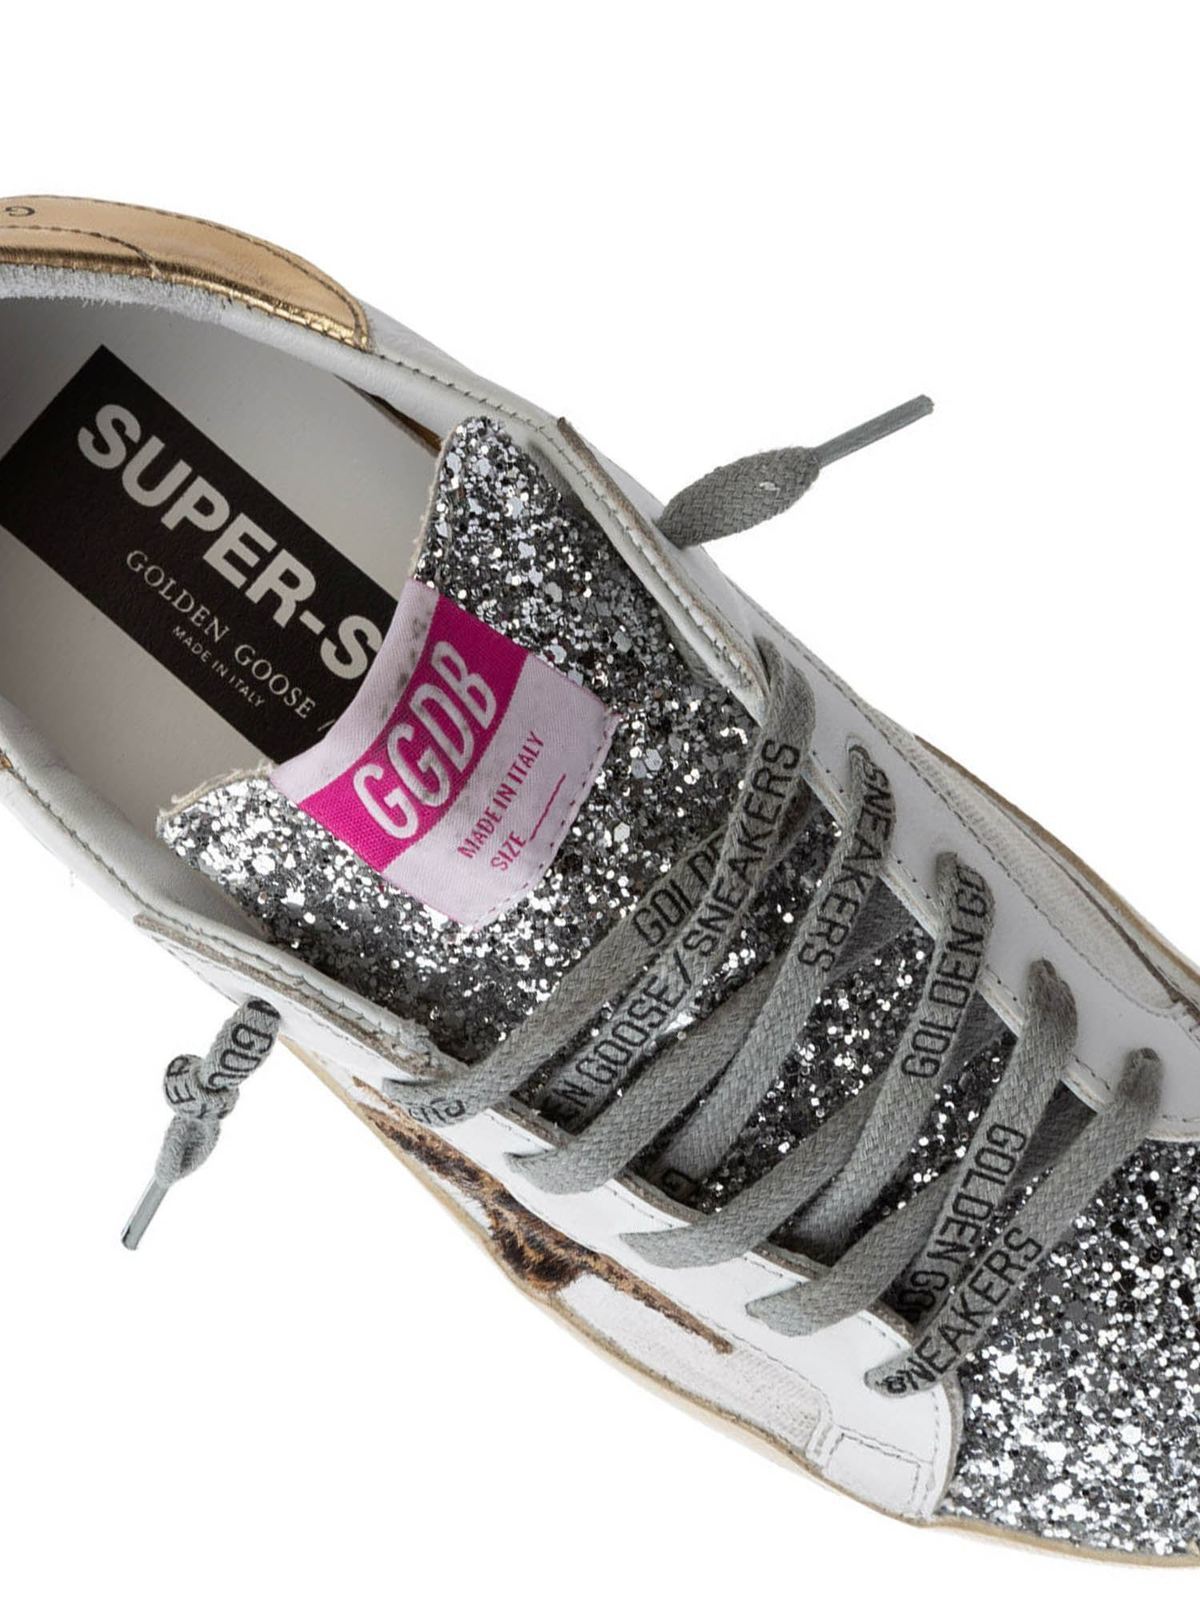 Buy > white and gold superstar golden goose > in stock